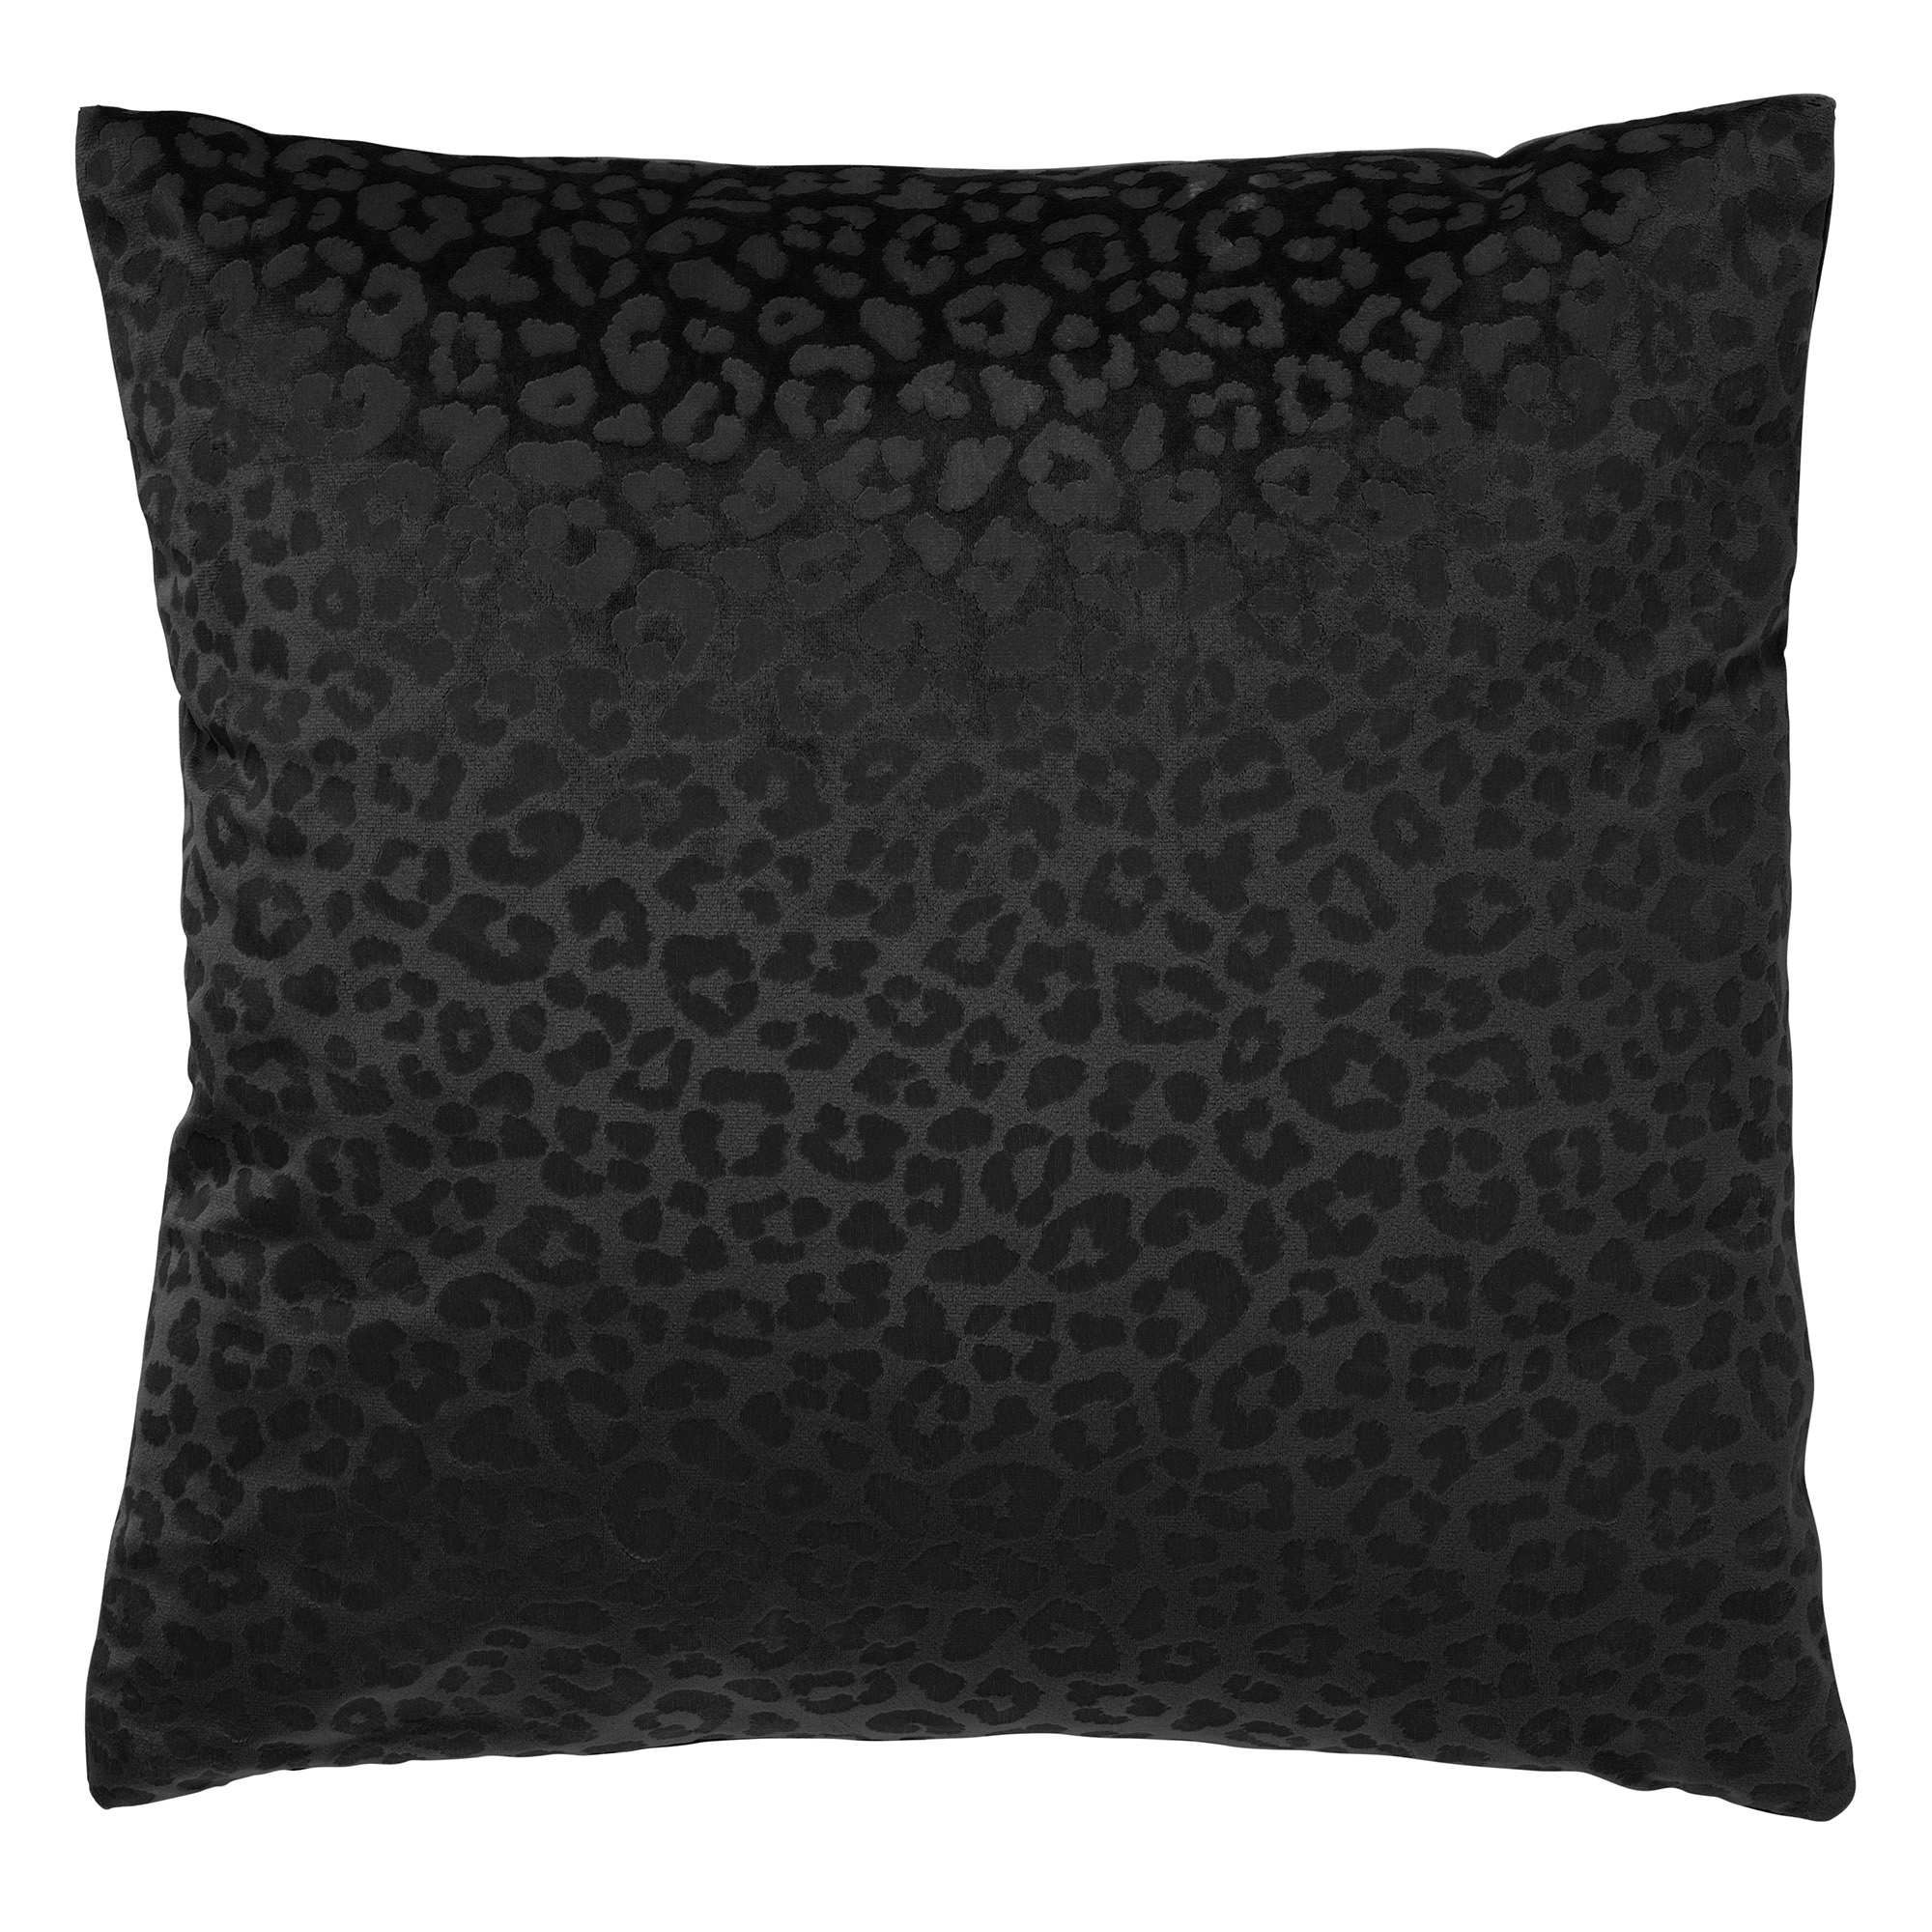 CHESSY - Cushion cover with animal print 45x45 cm Raven